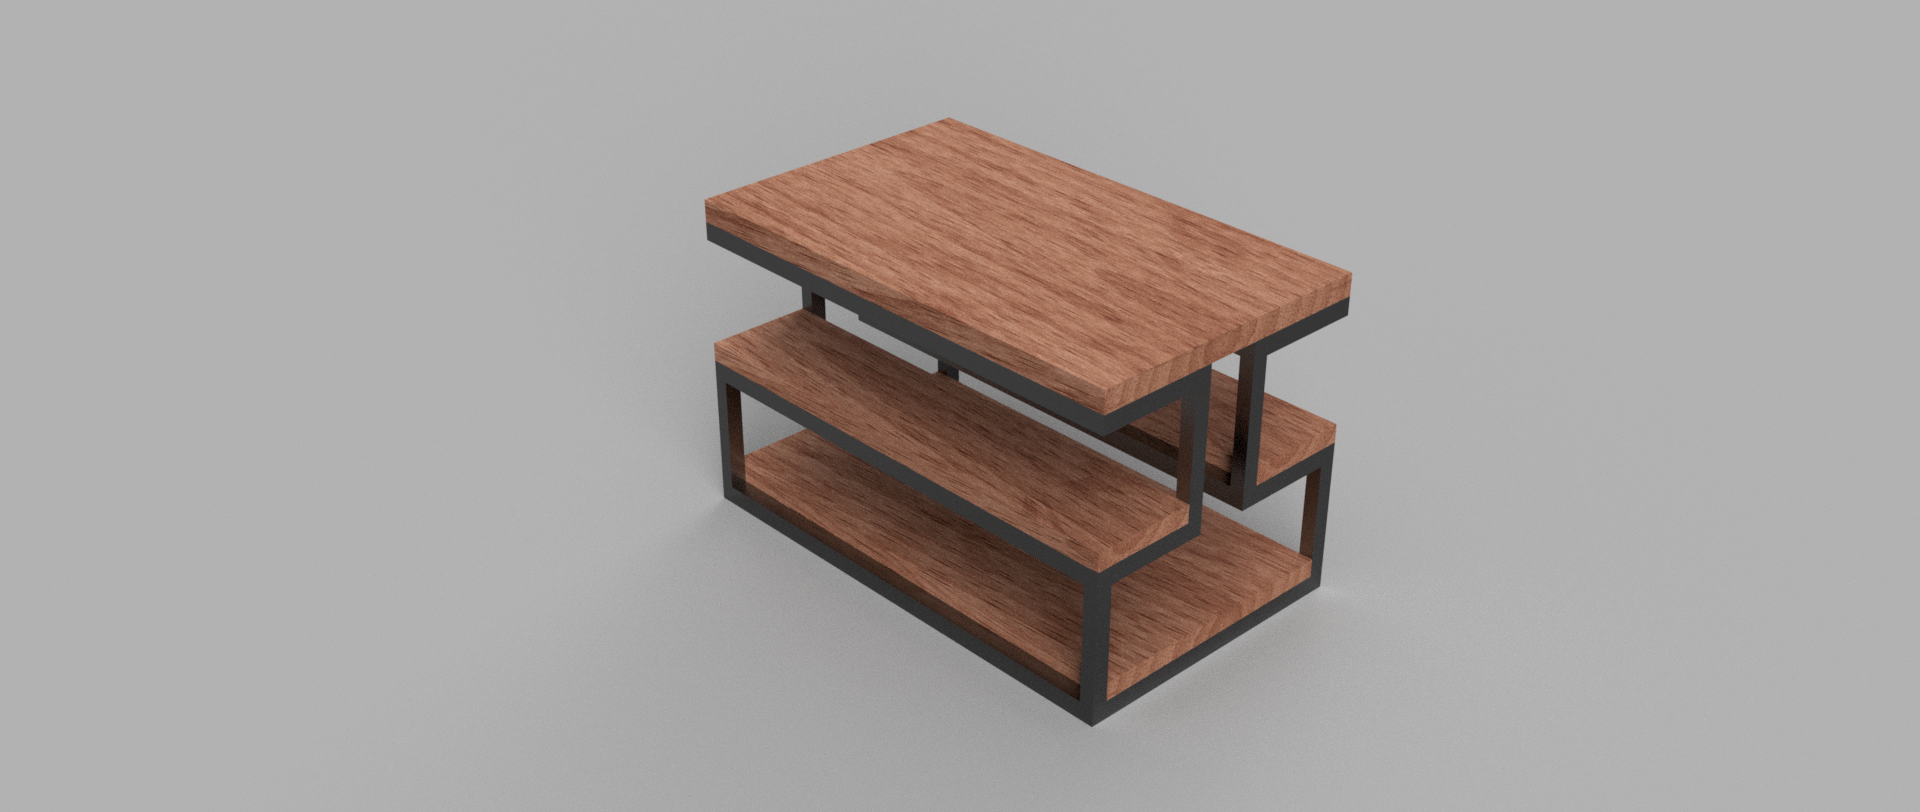 NE view wooden table.png